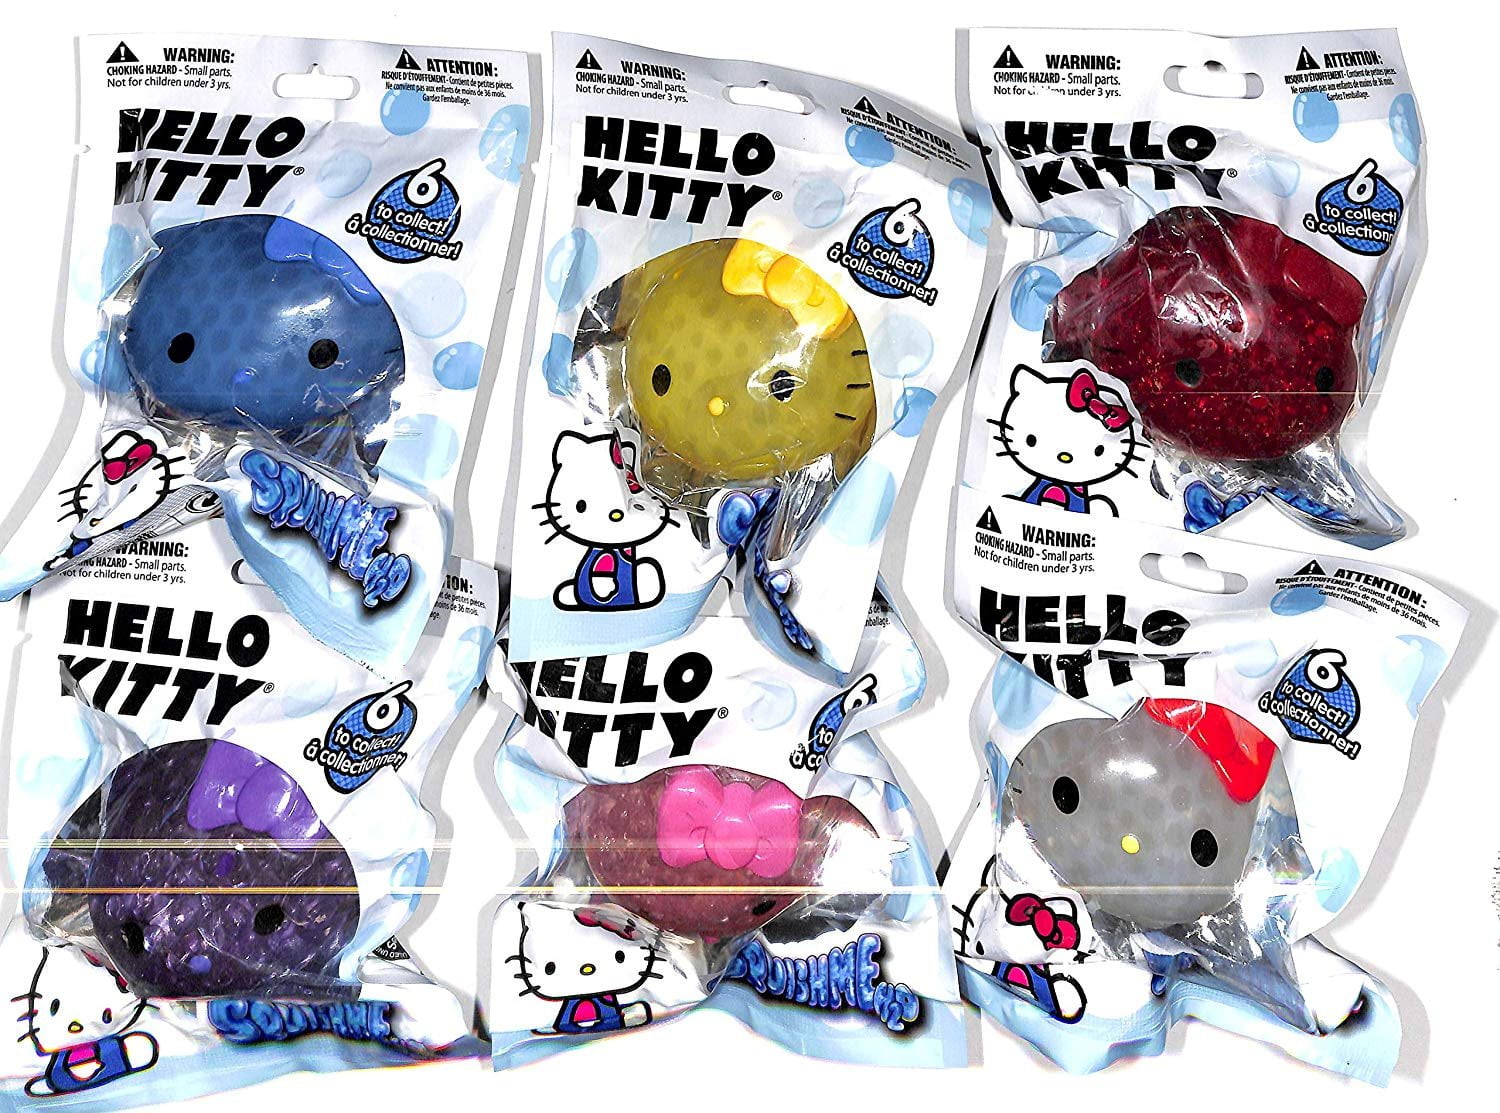 SQUISHME H2O HELLO KITTY COMPLETE SET OF 6 NEW SEALED 